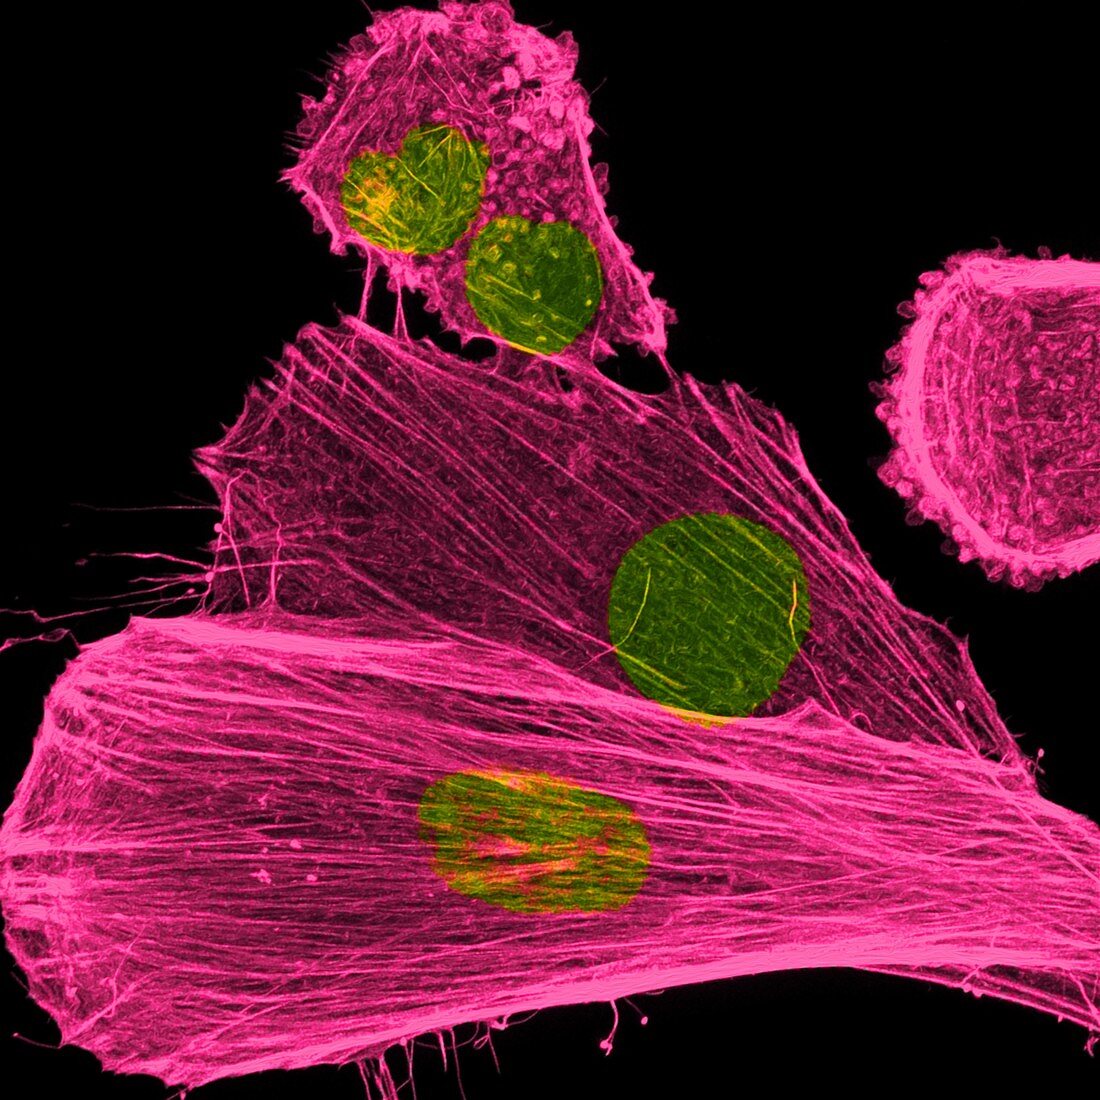 Cancer cells nuclei and cytoskeleton, light micrograph